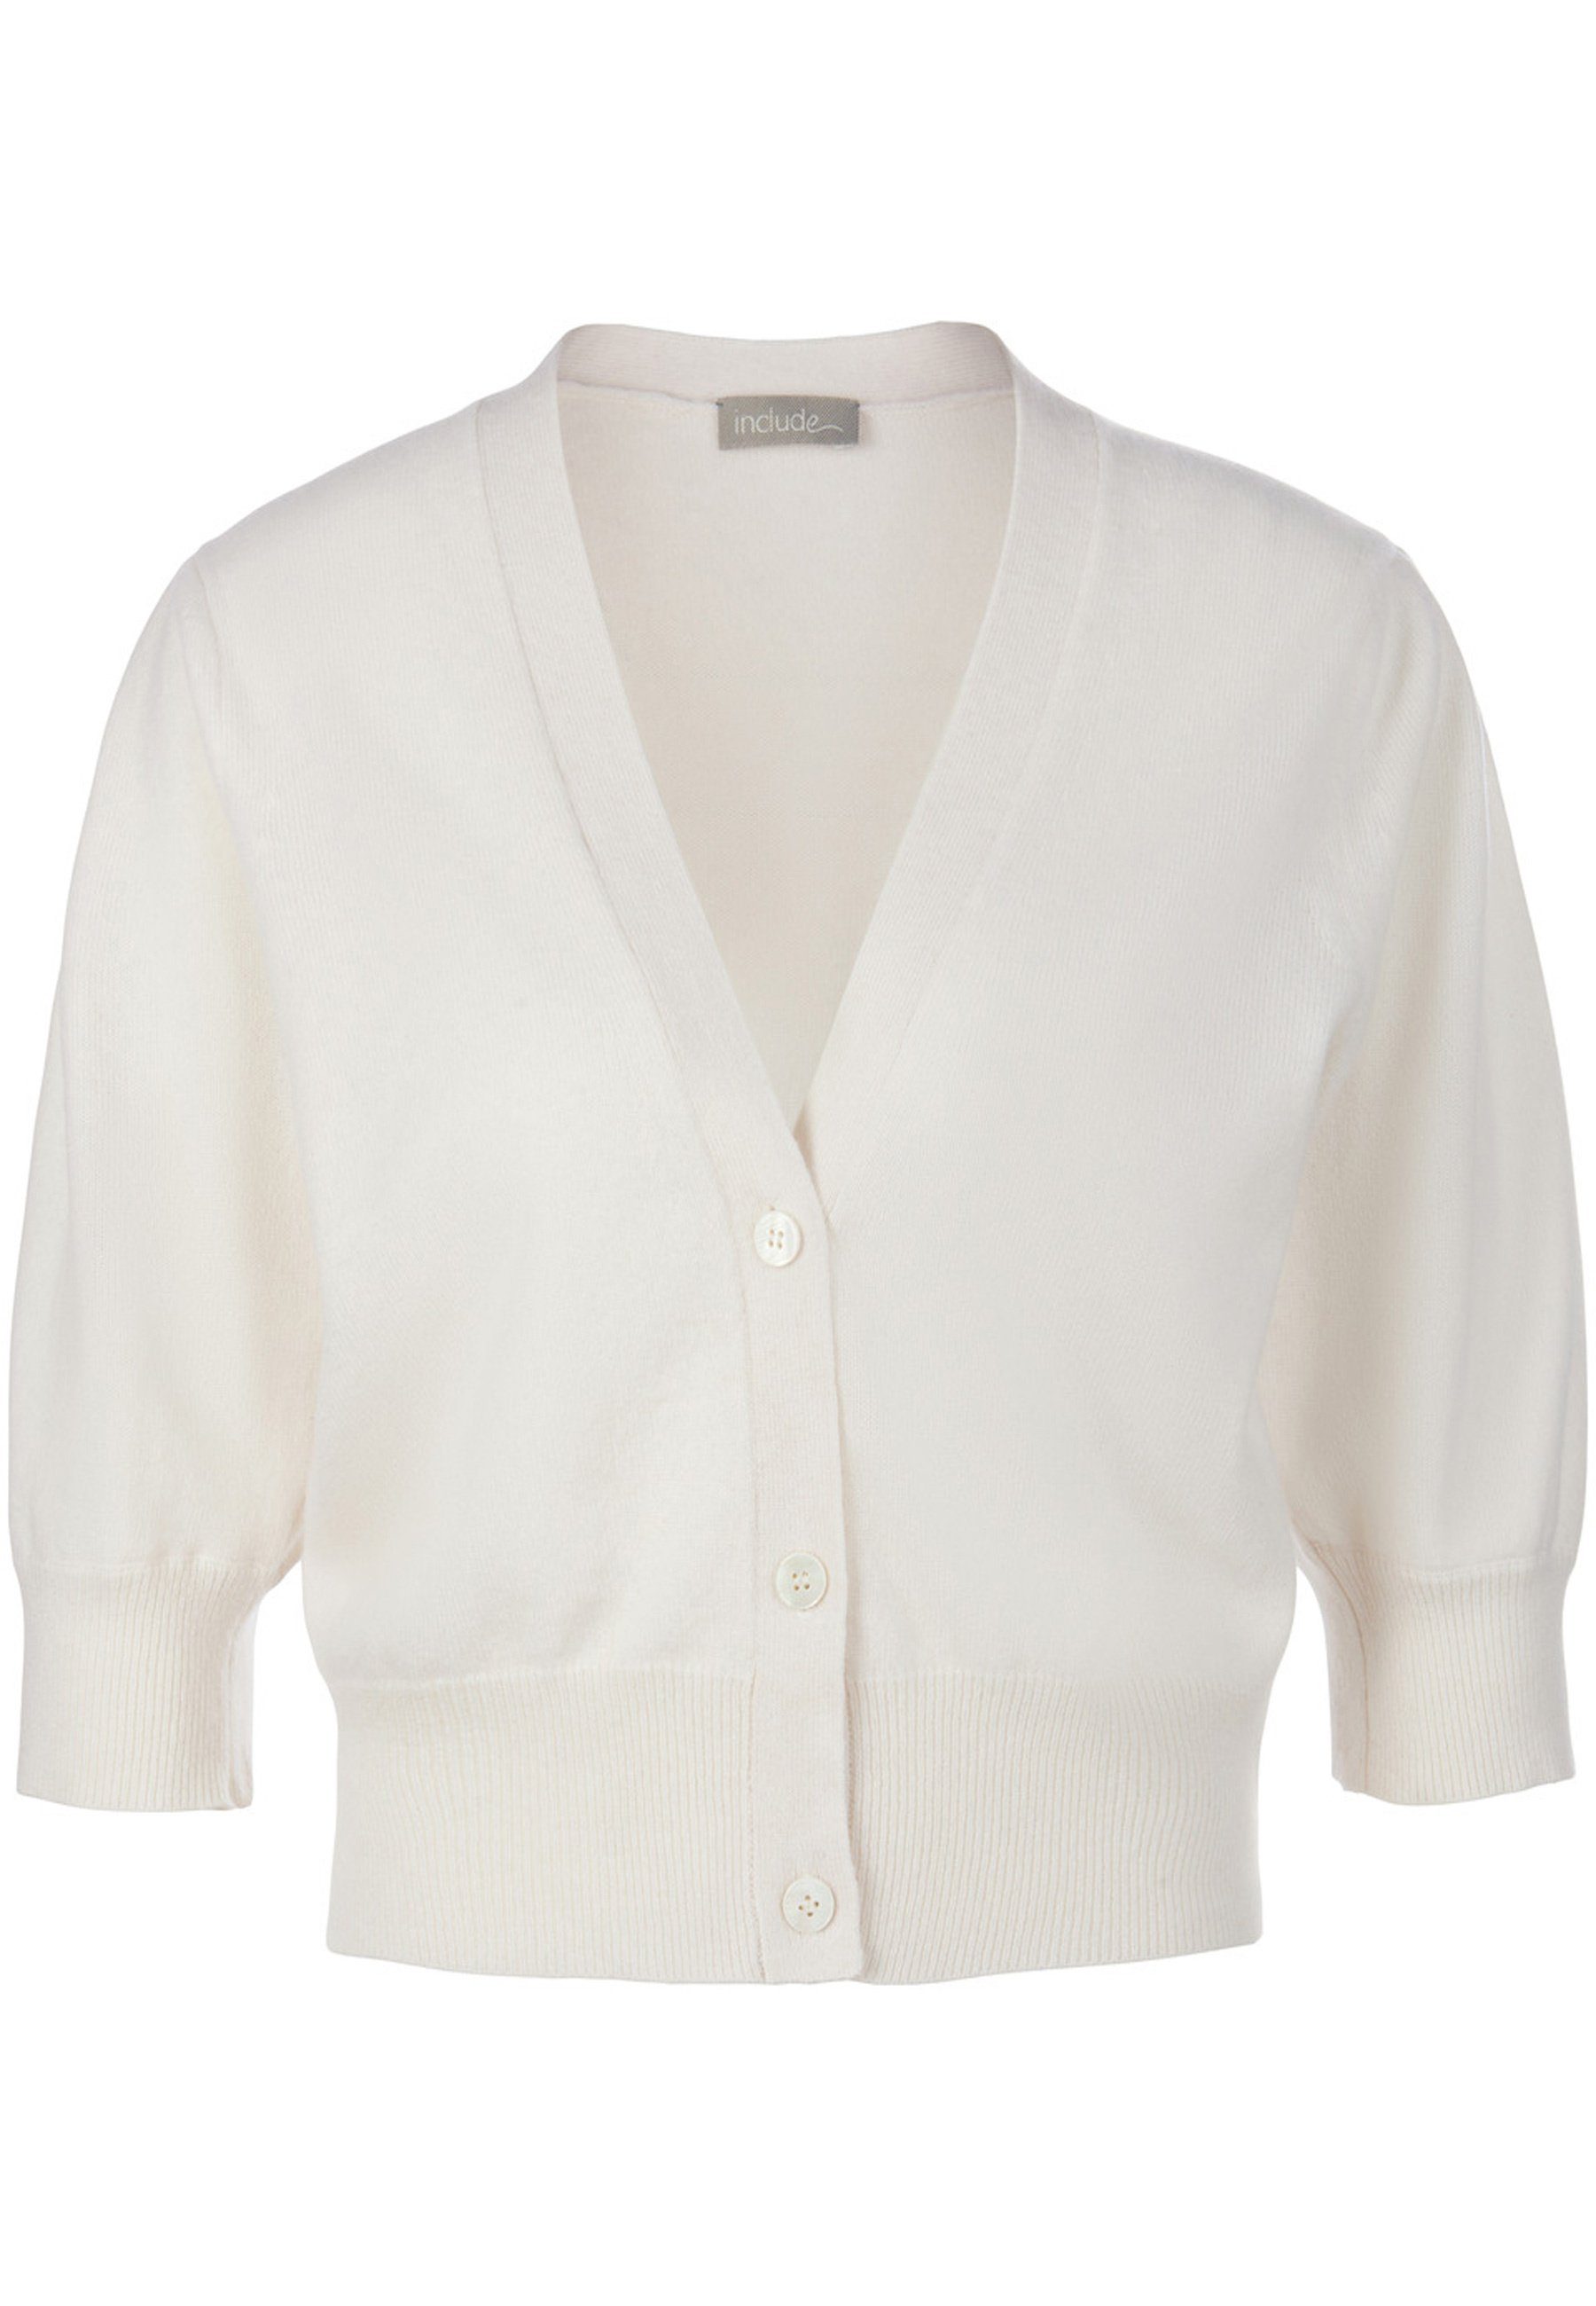 include Cardigan Cashmere wollweiss